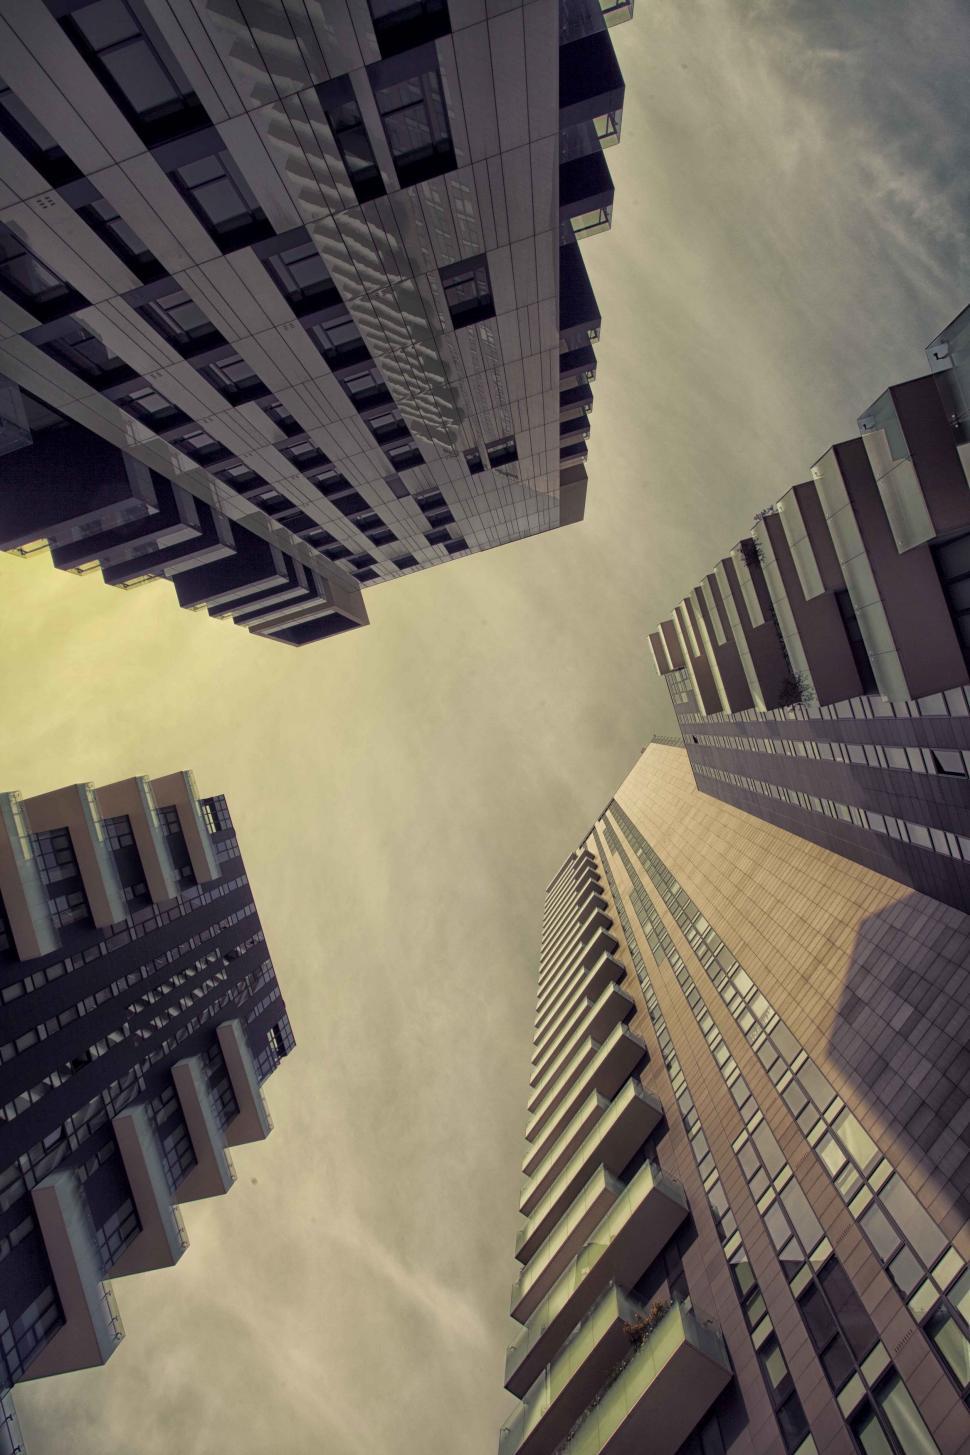 Free Image of Looking Up at Tall Buildings 